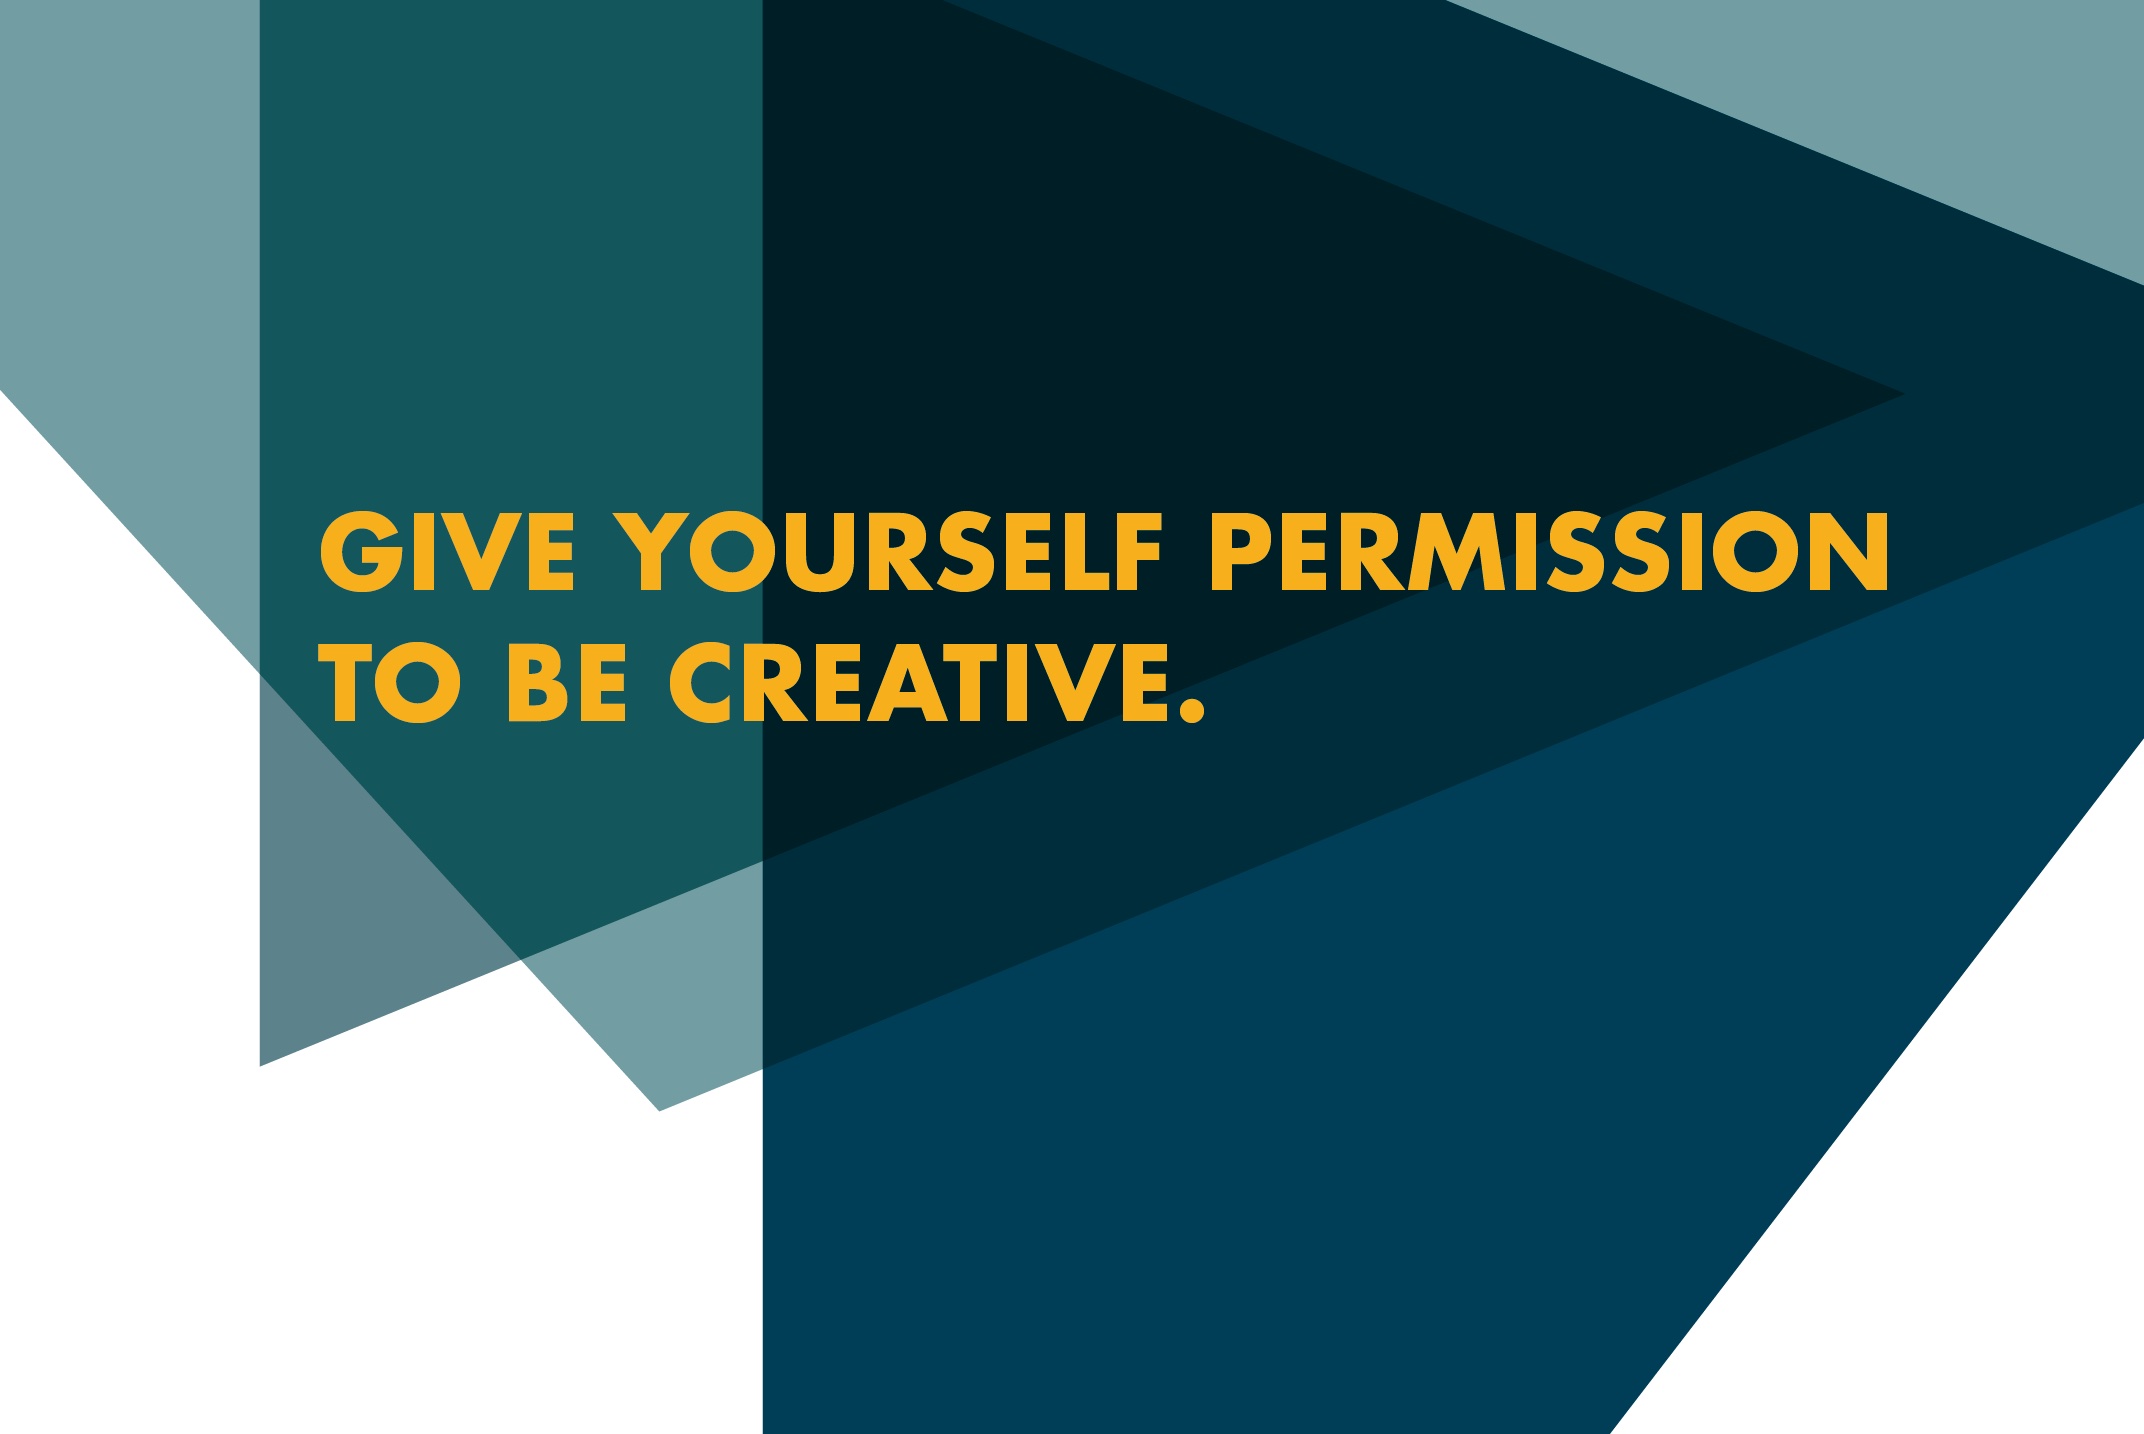 FAST FORWARD: Give yourself permission to be creative